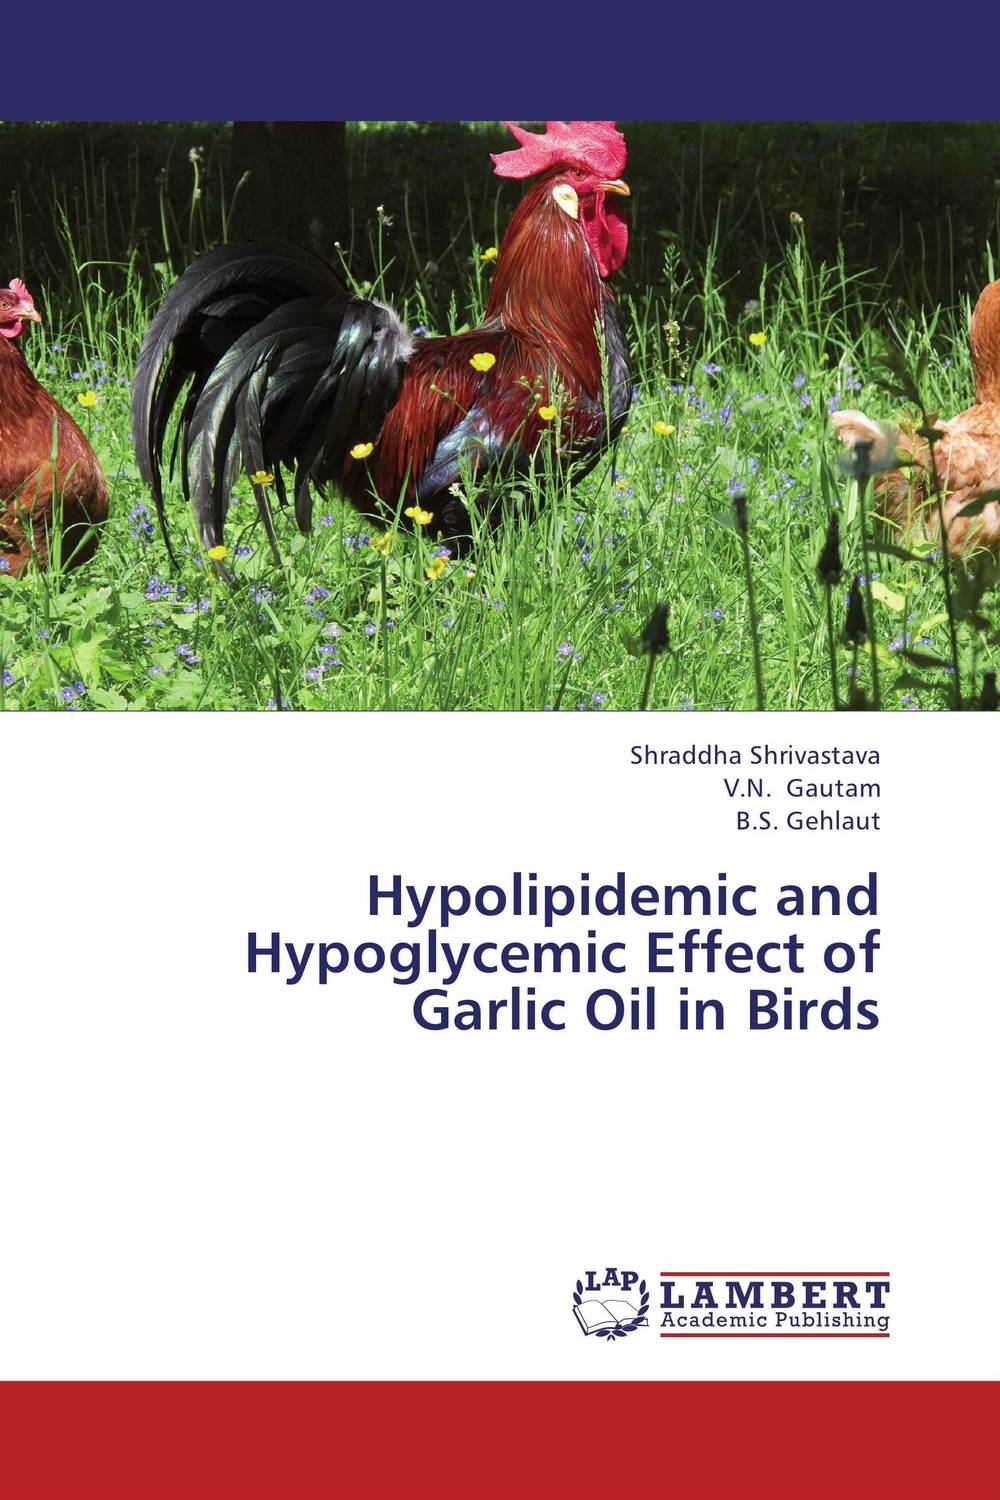 Hypolipidemic and Hypoglycemic Effect of Garlic Oil in Birds